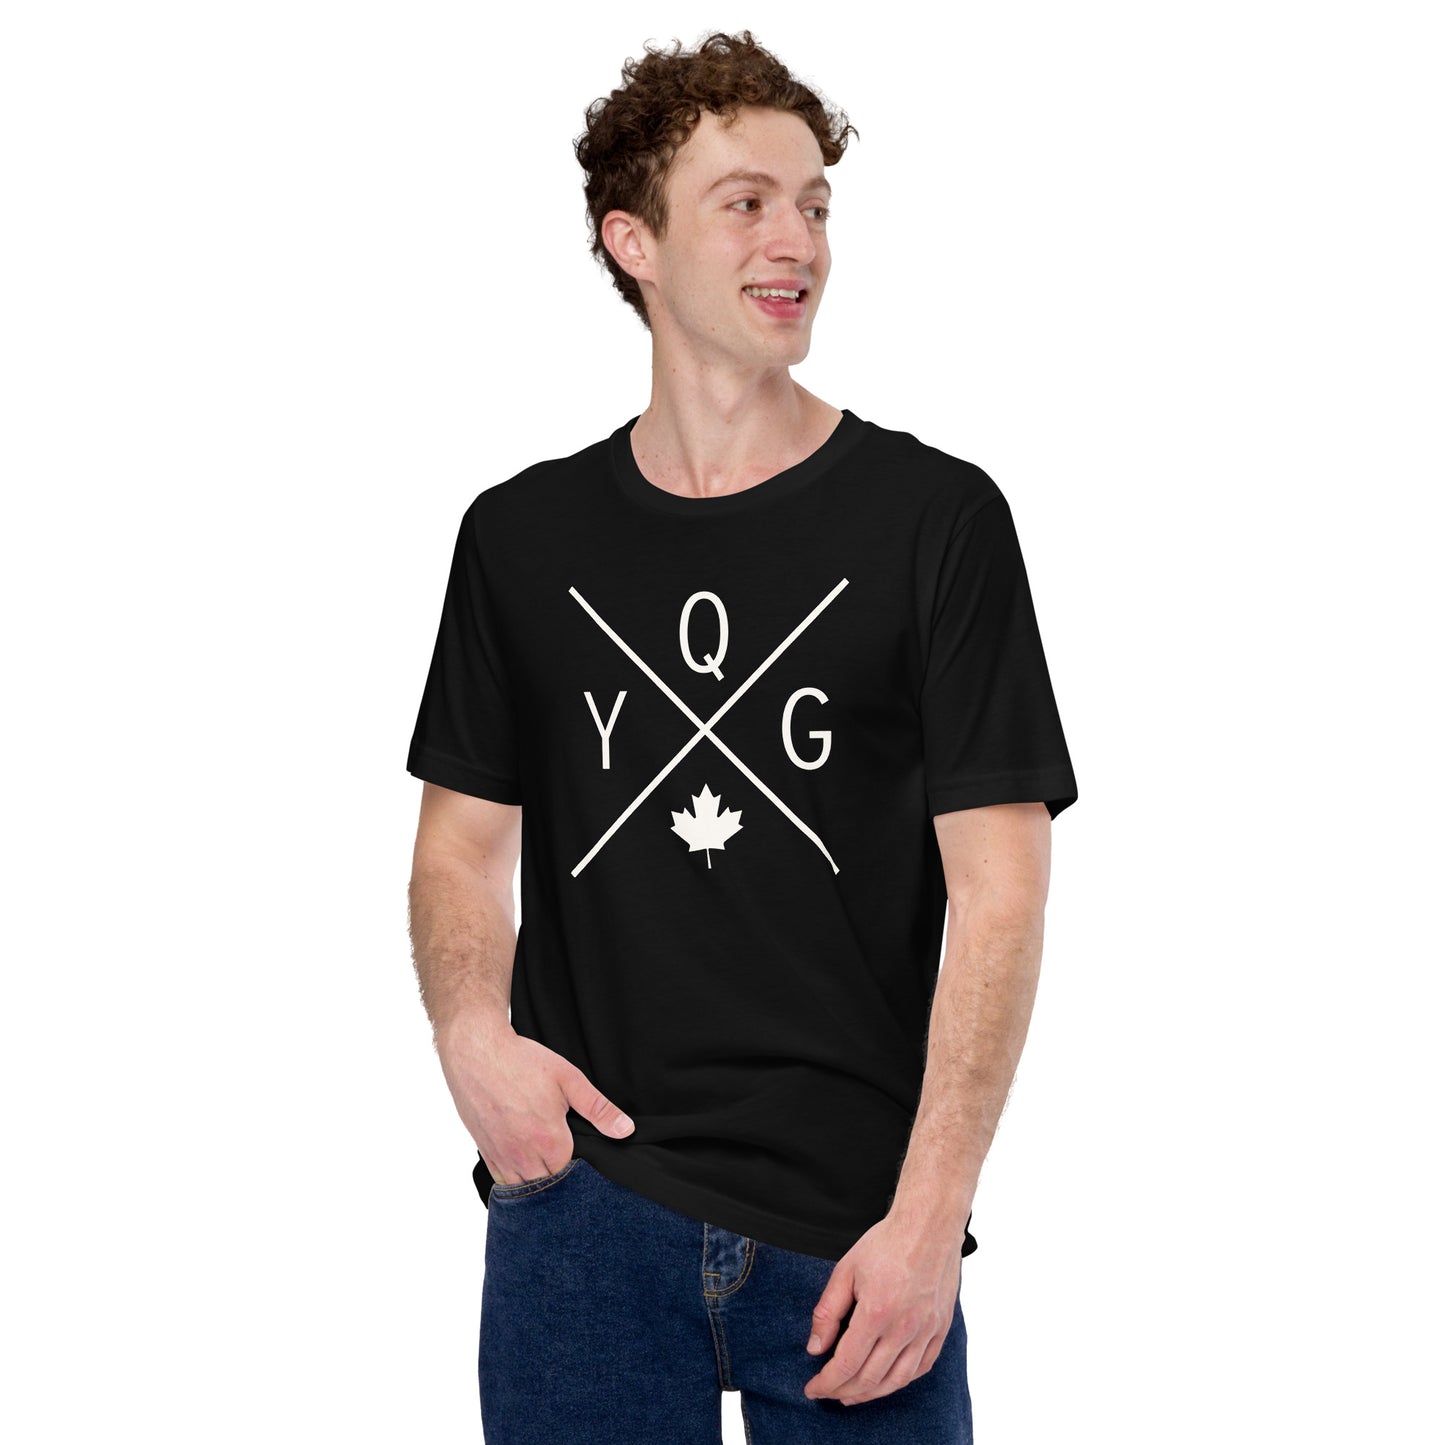 Crossed-X T-Shirt - White Graphic • YQG Windsor • YHM Designs - Image 06